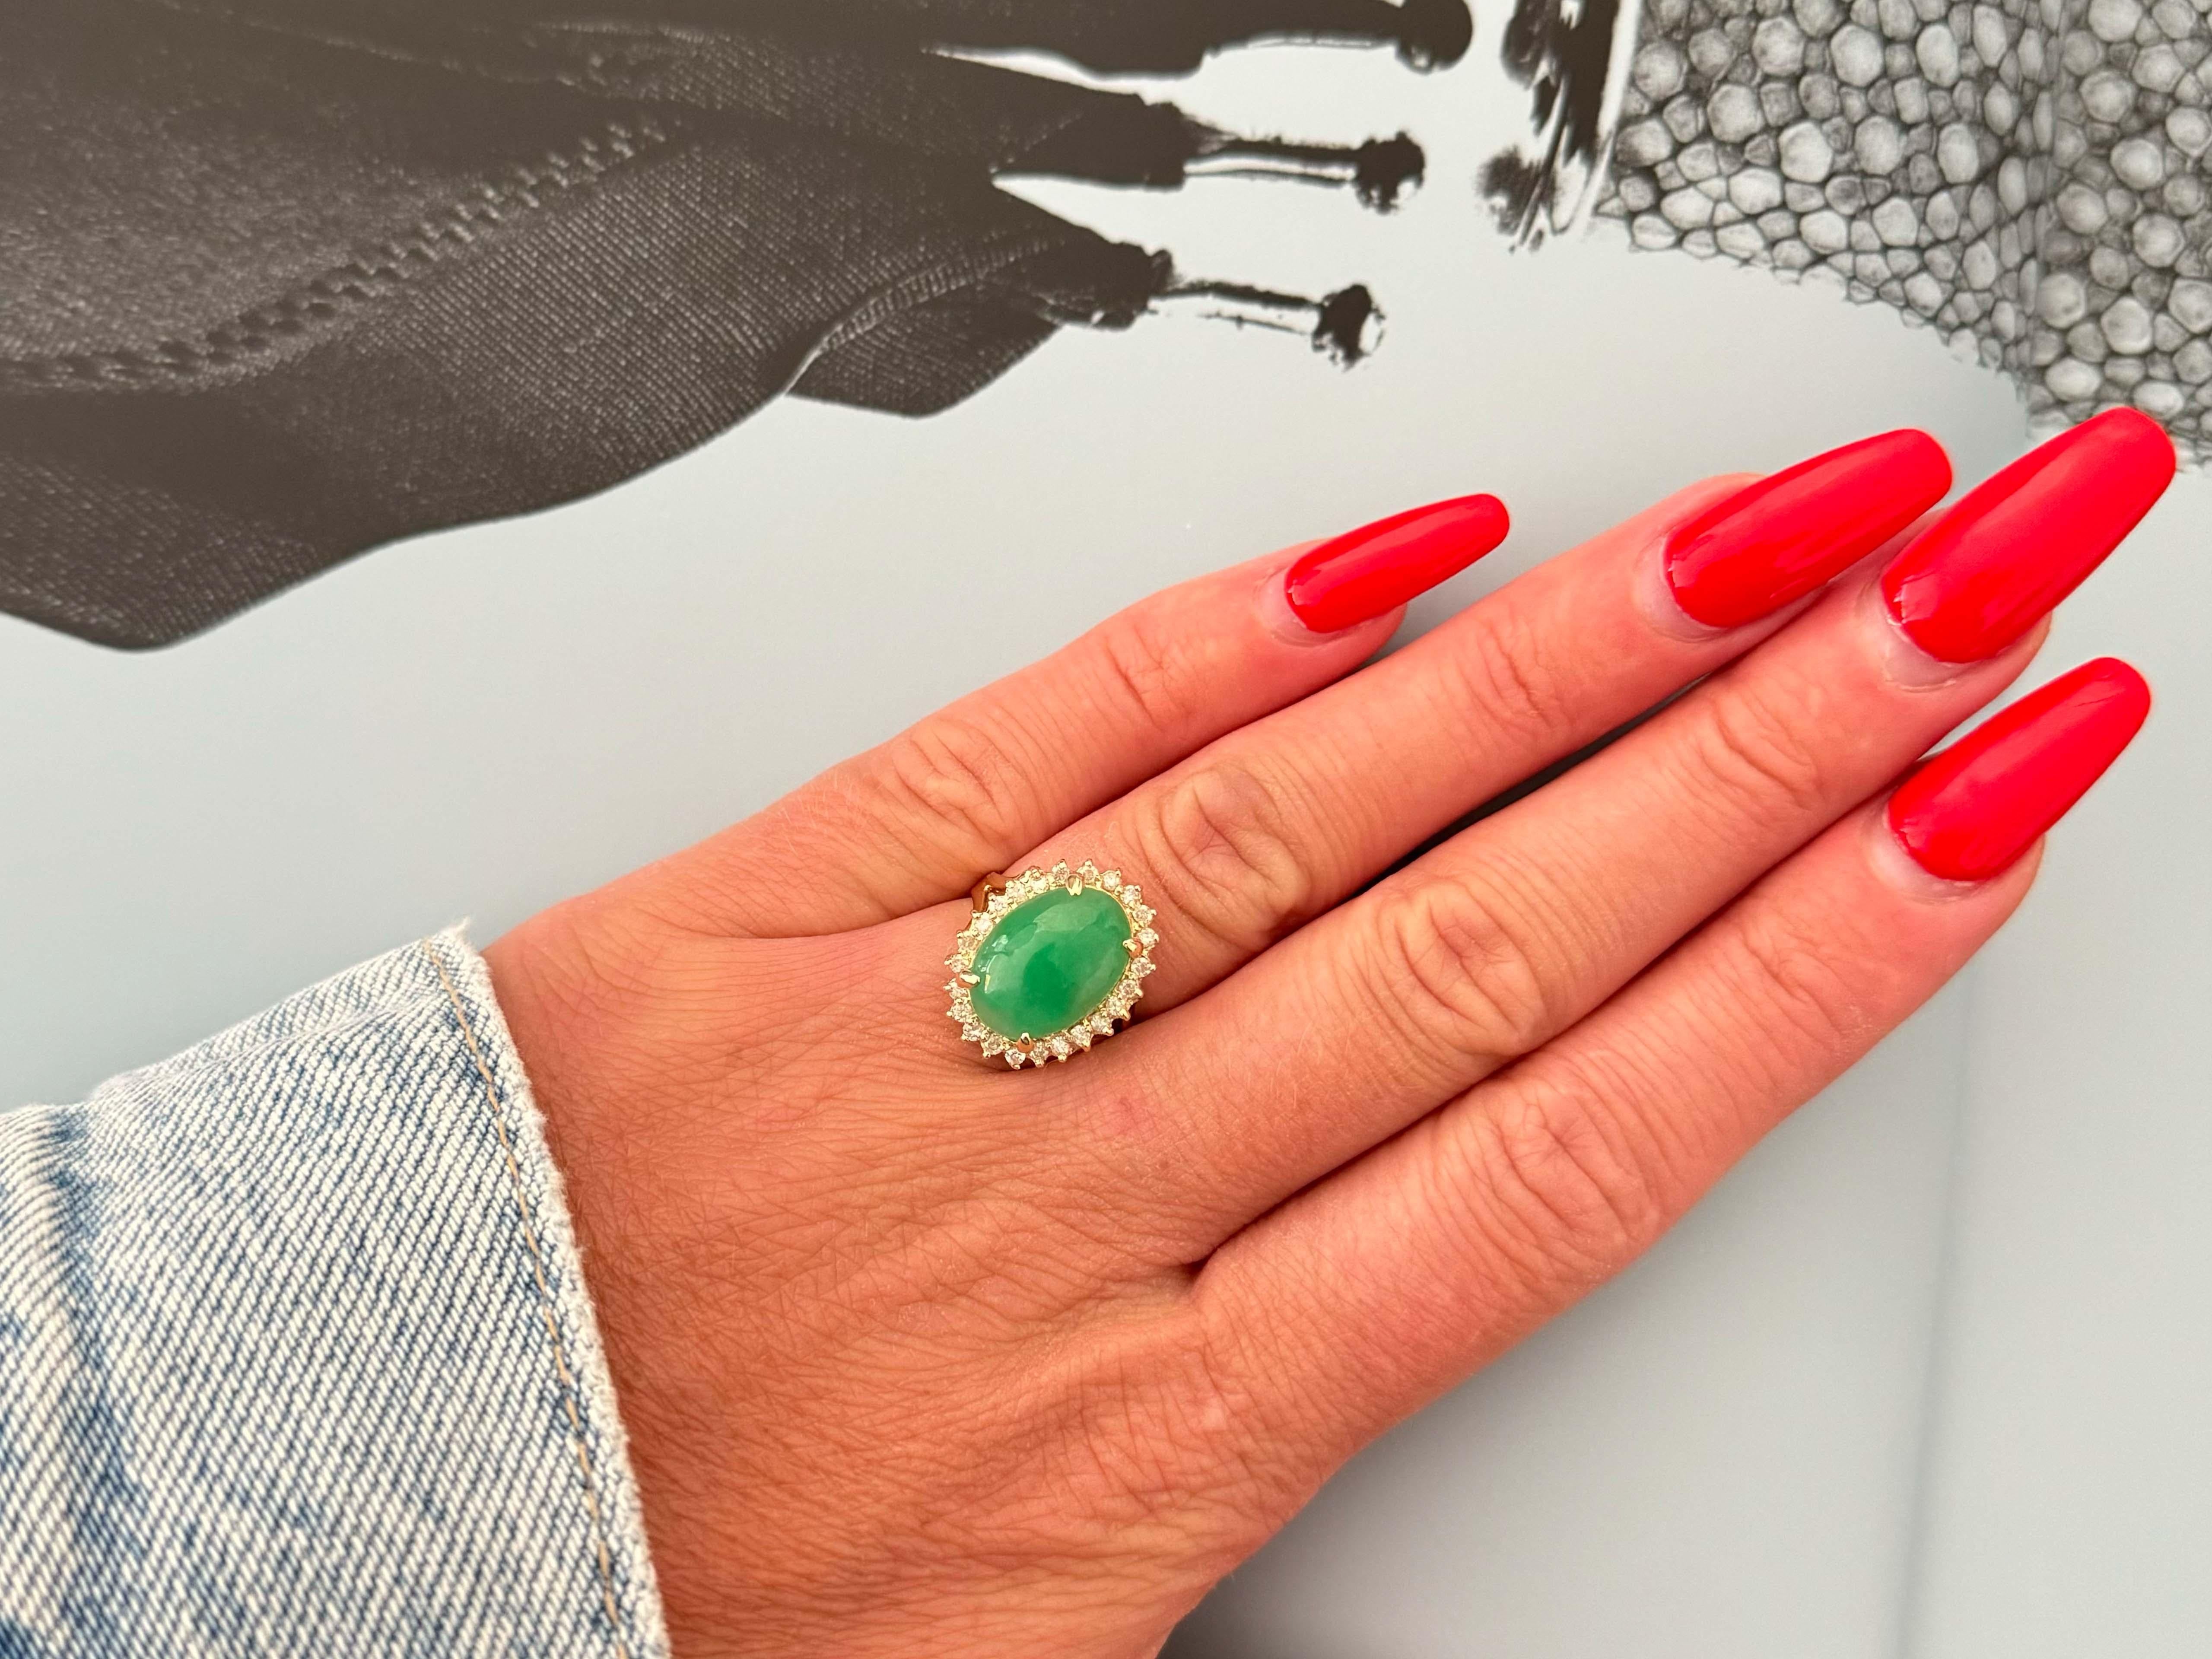 Ring Specifications:

Metal: 14k Yellow Gold

Total Weight: 3.9 Grams

Diamond Count: 24
​
​Diamond Carat Weight: 0.25 carats
​
​Diamond Color: I-K
​
​​Diamond Clarity: I1-I2

Jade Carat Weight: ~5 carats

Jade Measurements: 14 mm x 10.1 mm x 3.8